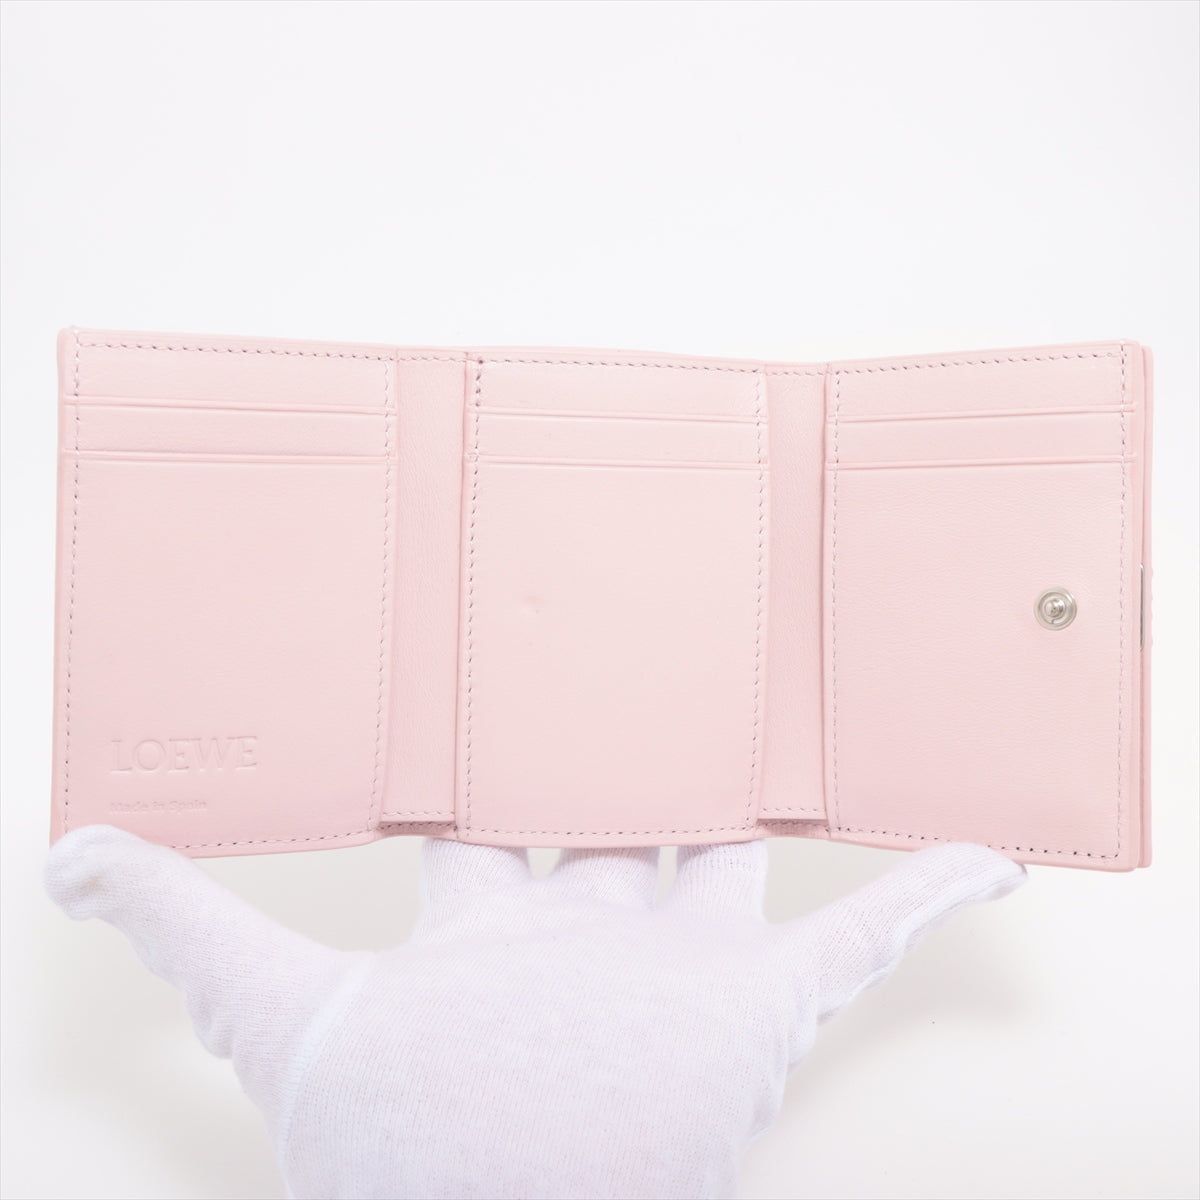 Loewe Anagram Tri Fold Leather Compact Wallet Pink